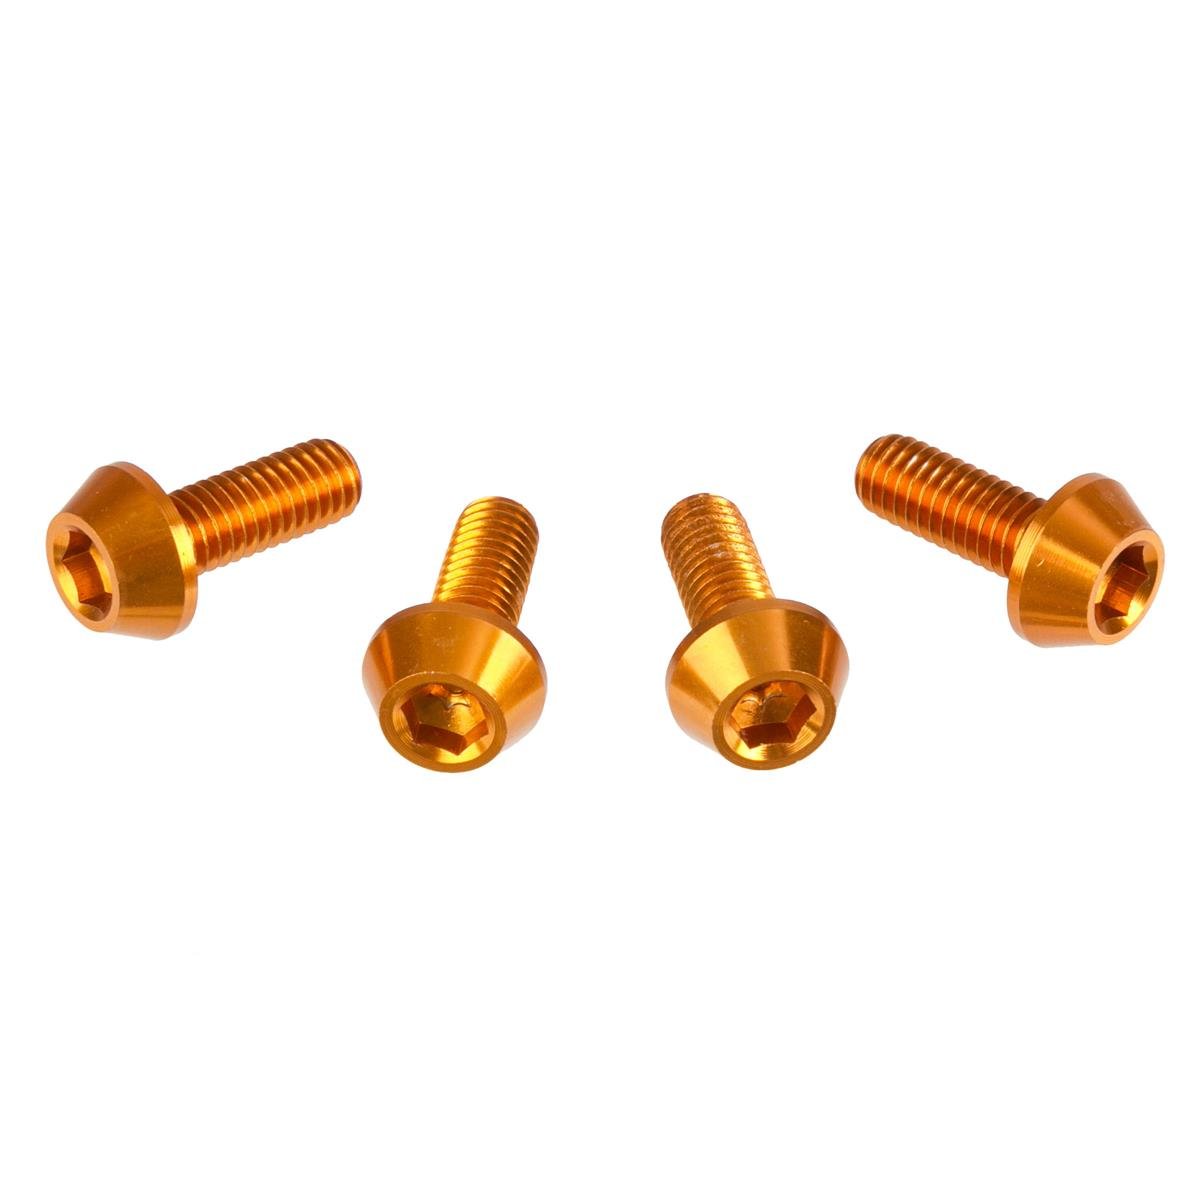 DRC Inner Hex Bolts  M6 x 16 mm, Gold, Pack of 4